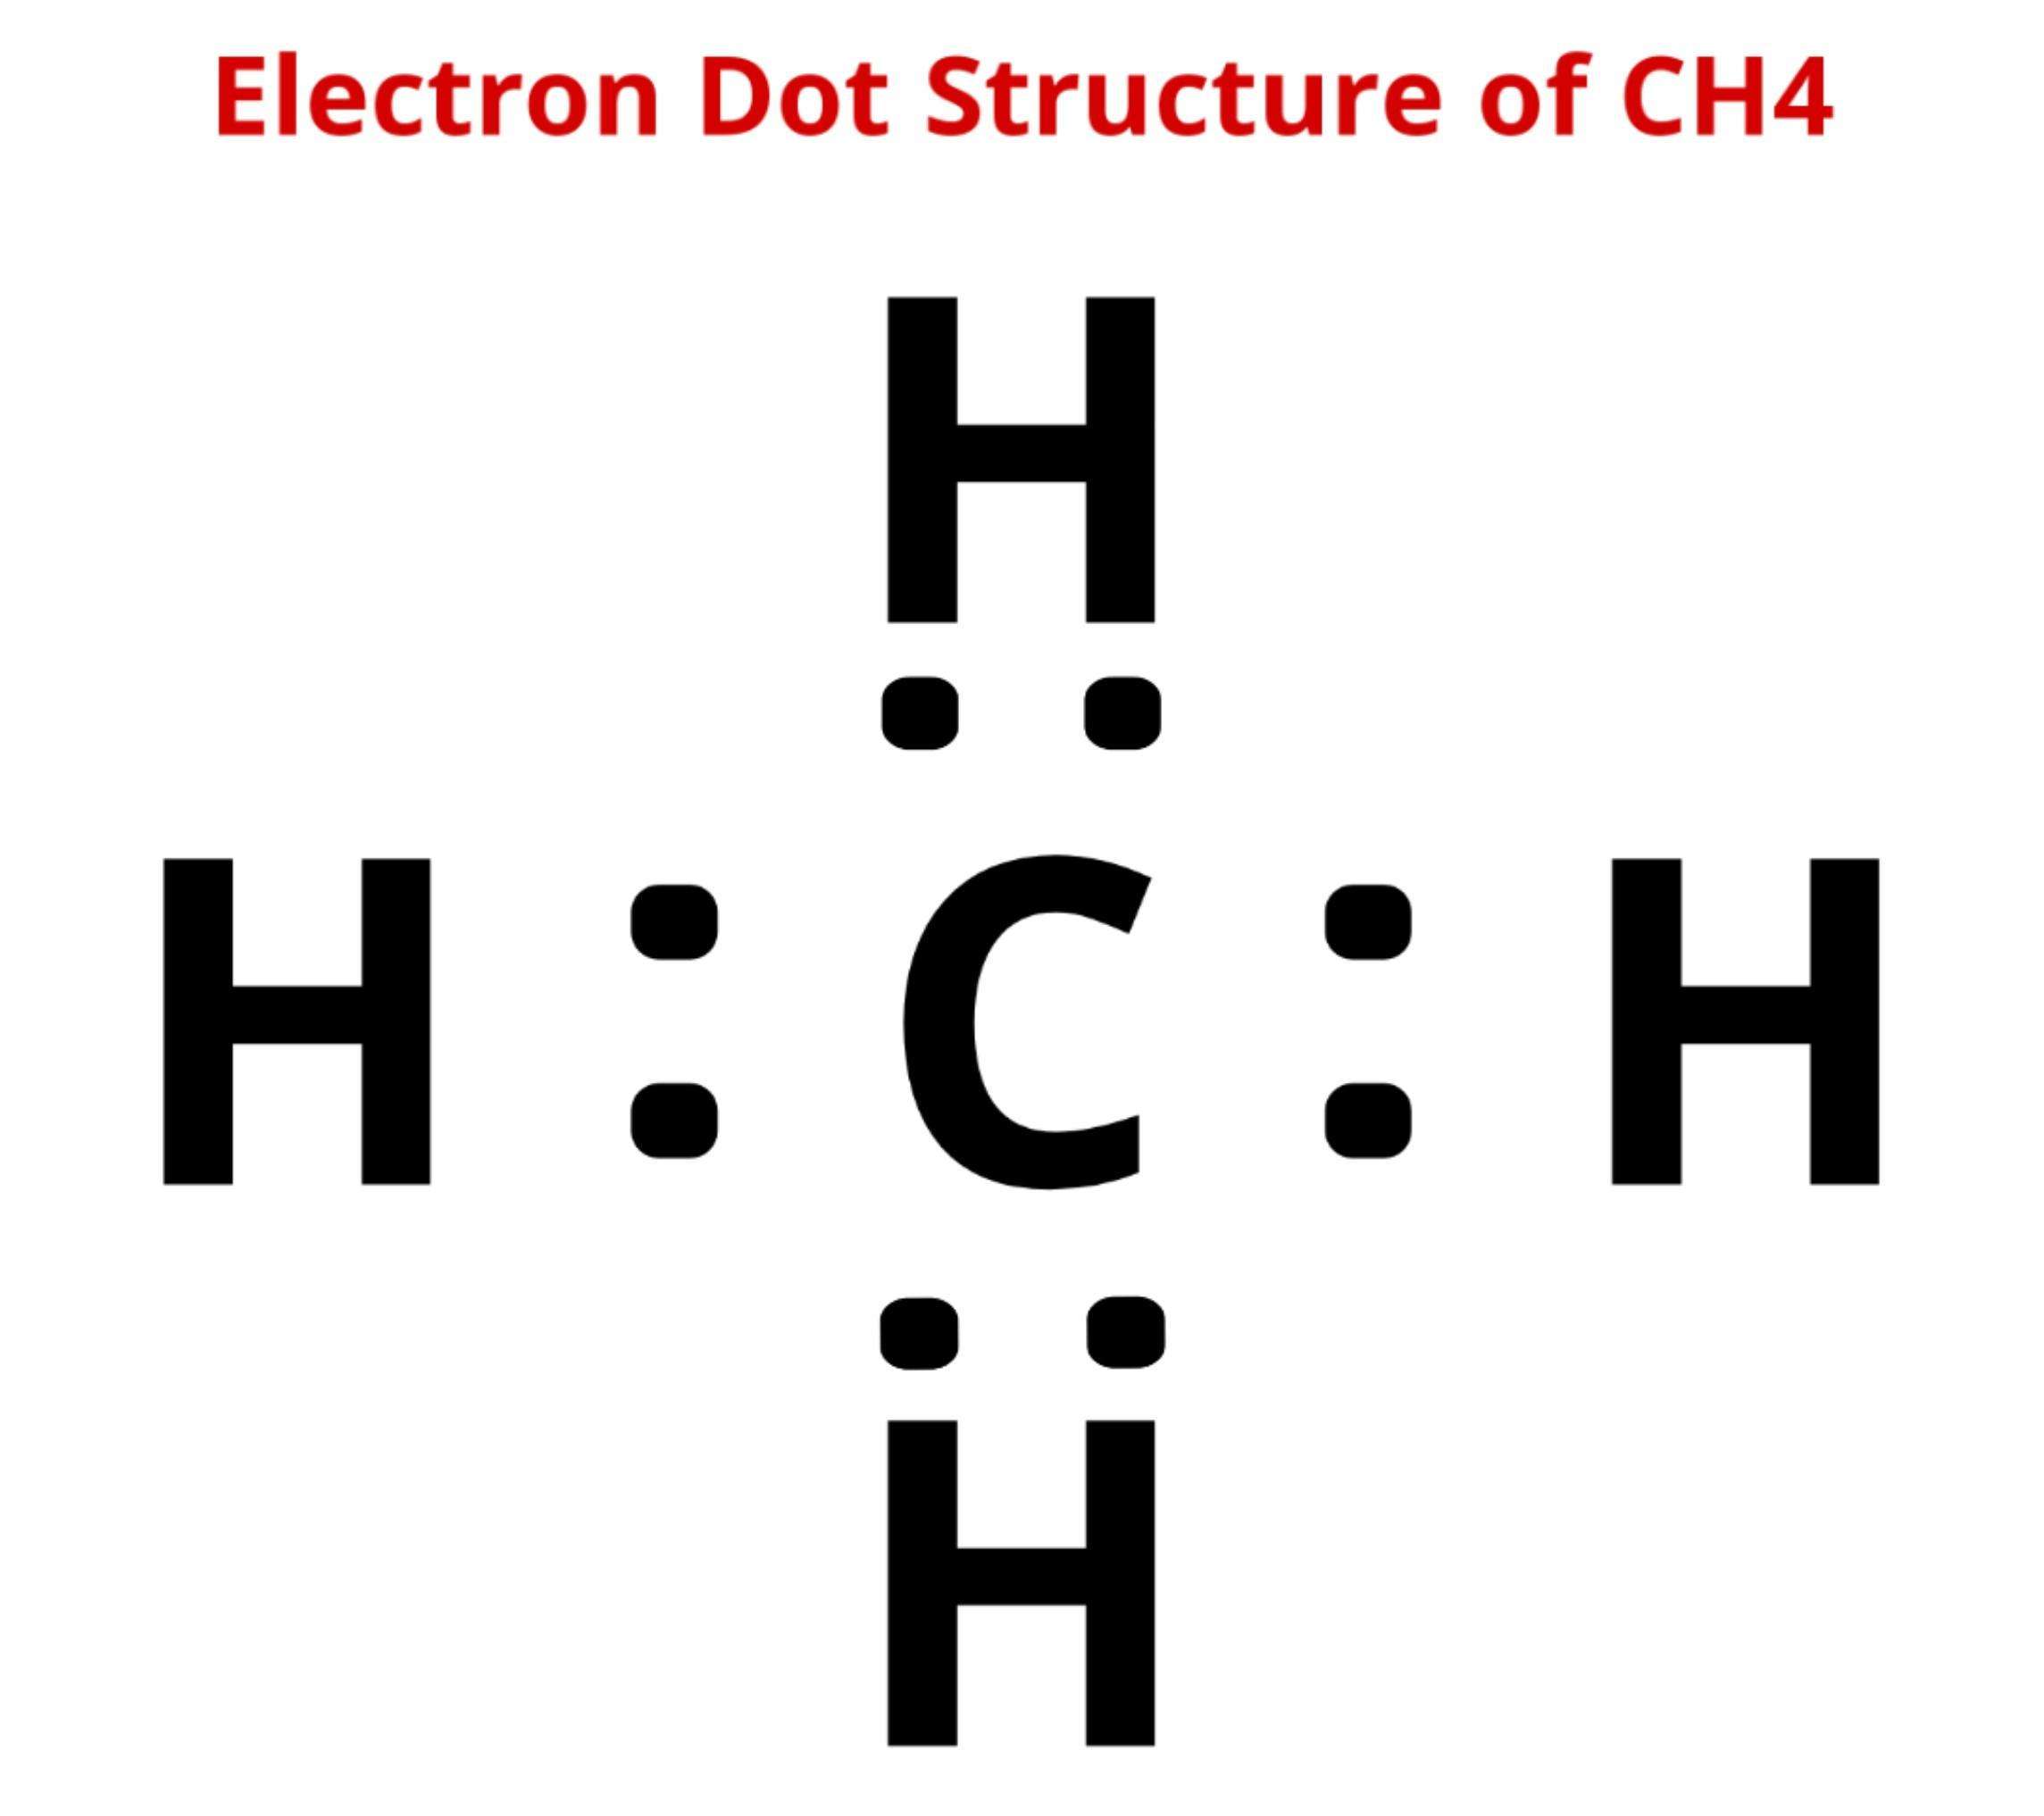 draw the electron dot structure of CH4